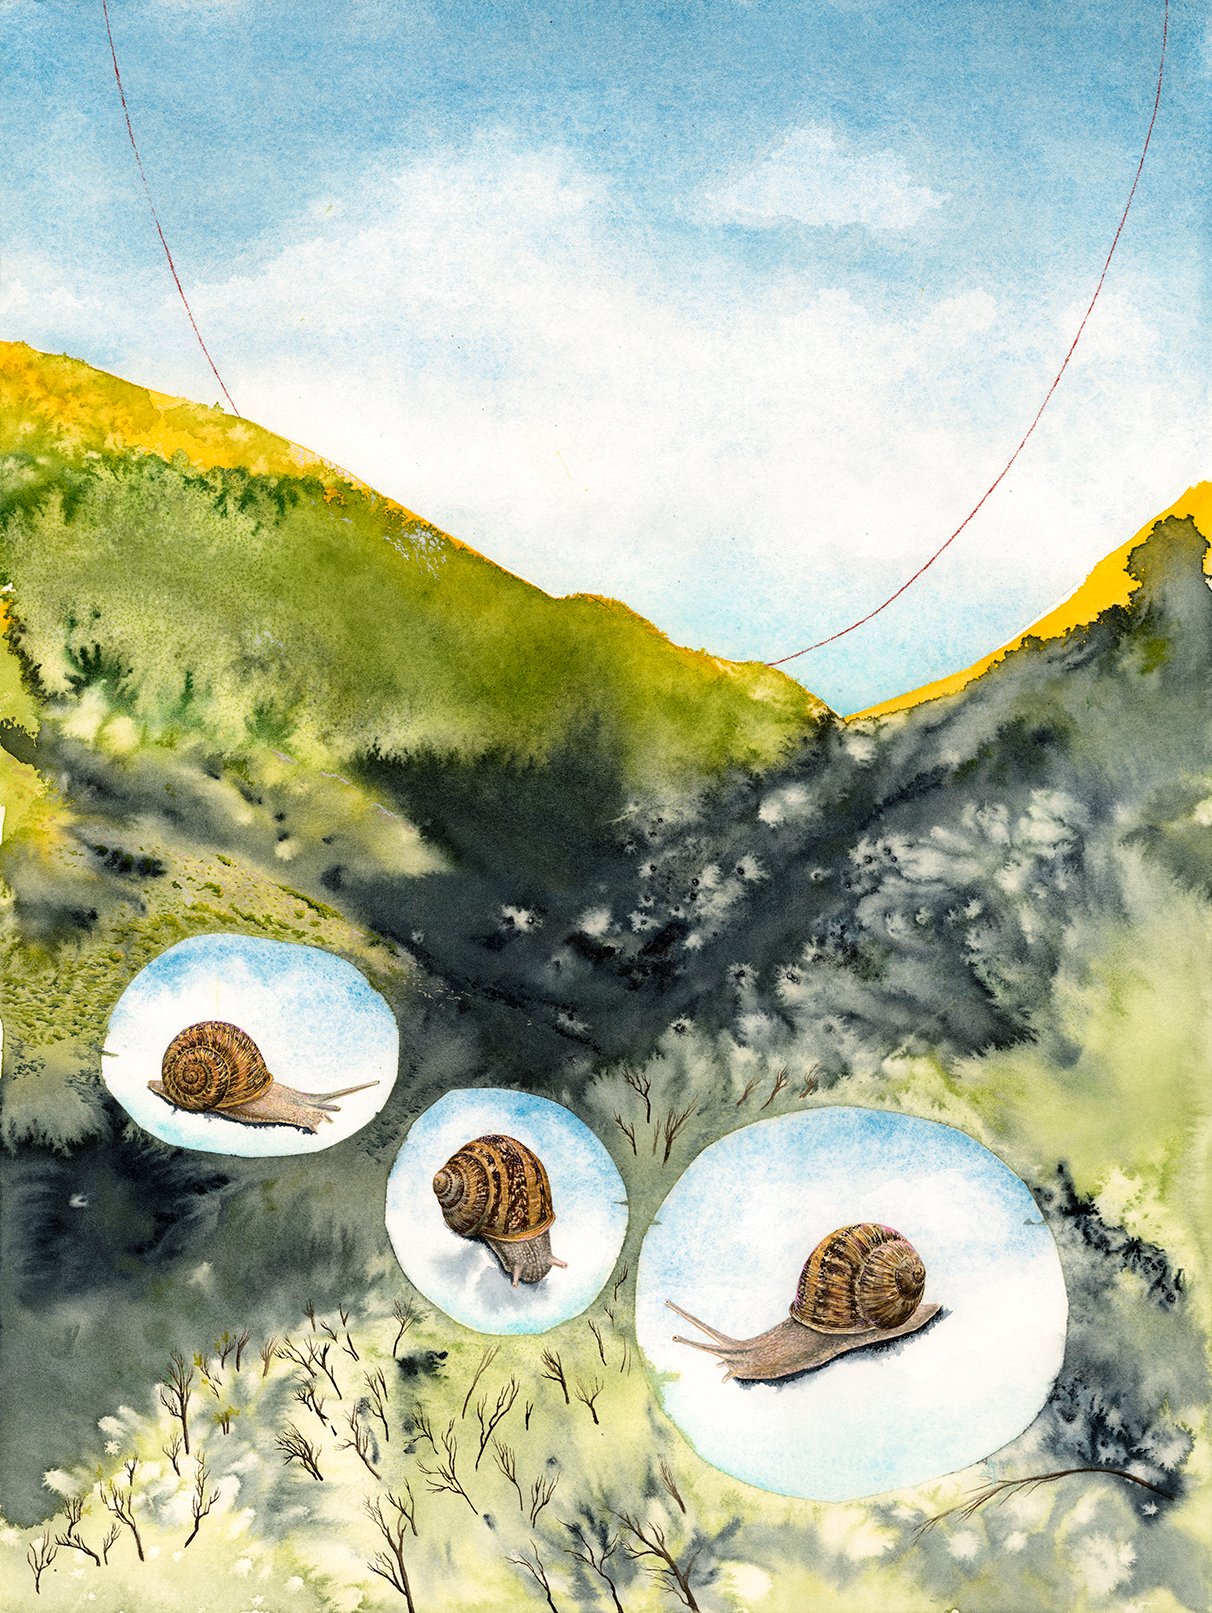 "Snails at the Entrance" giclee print